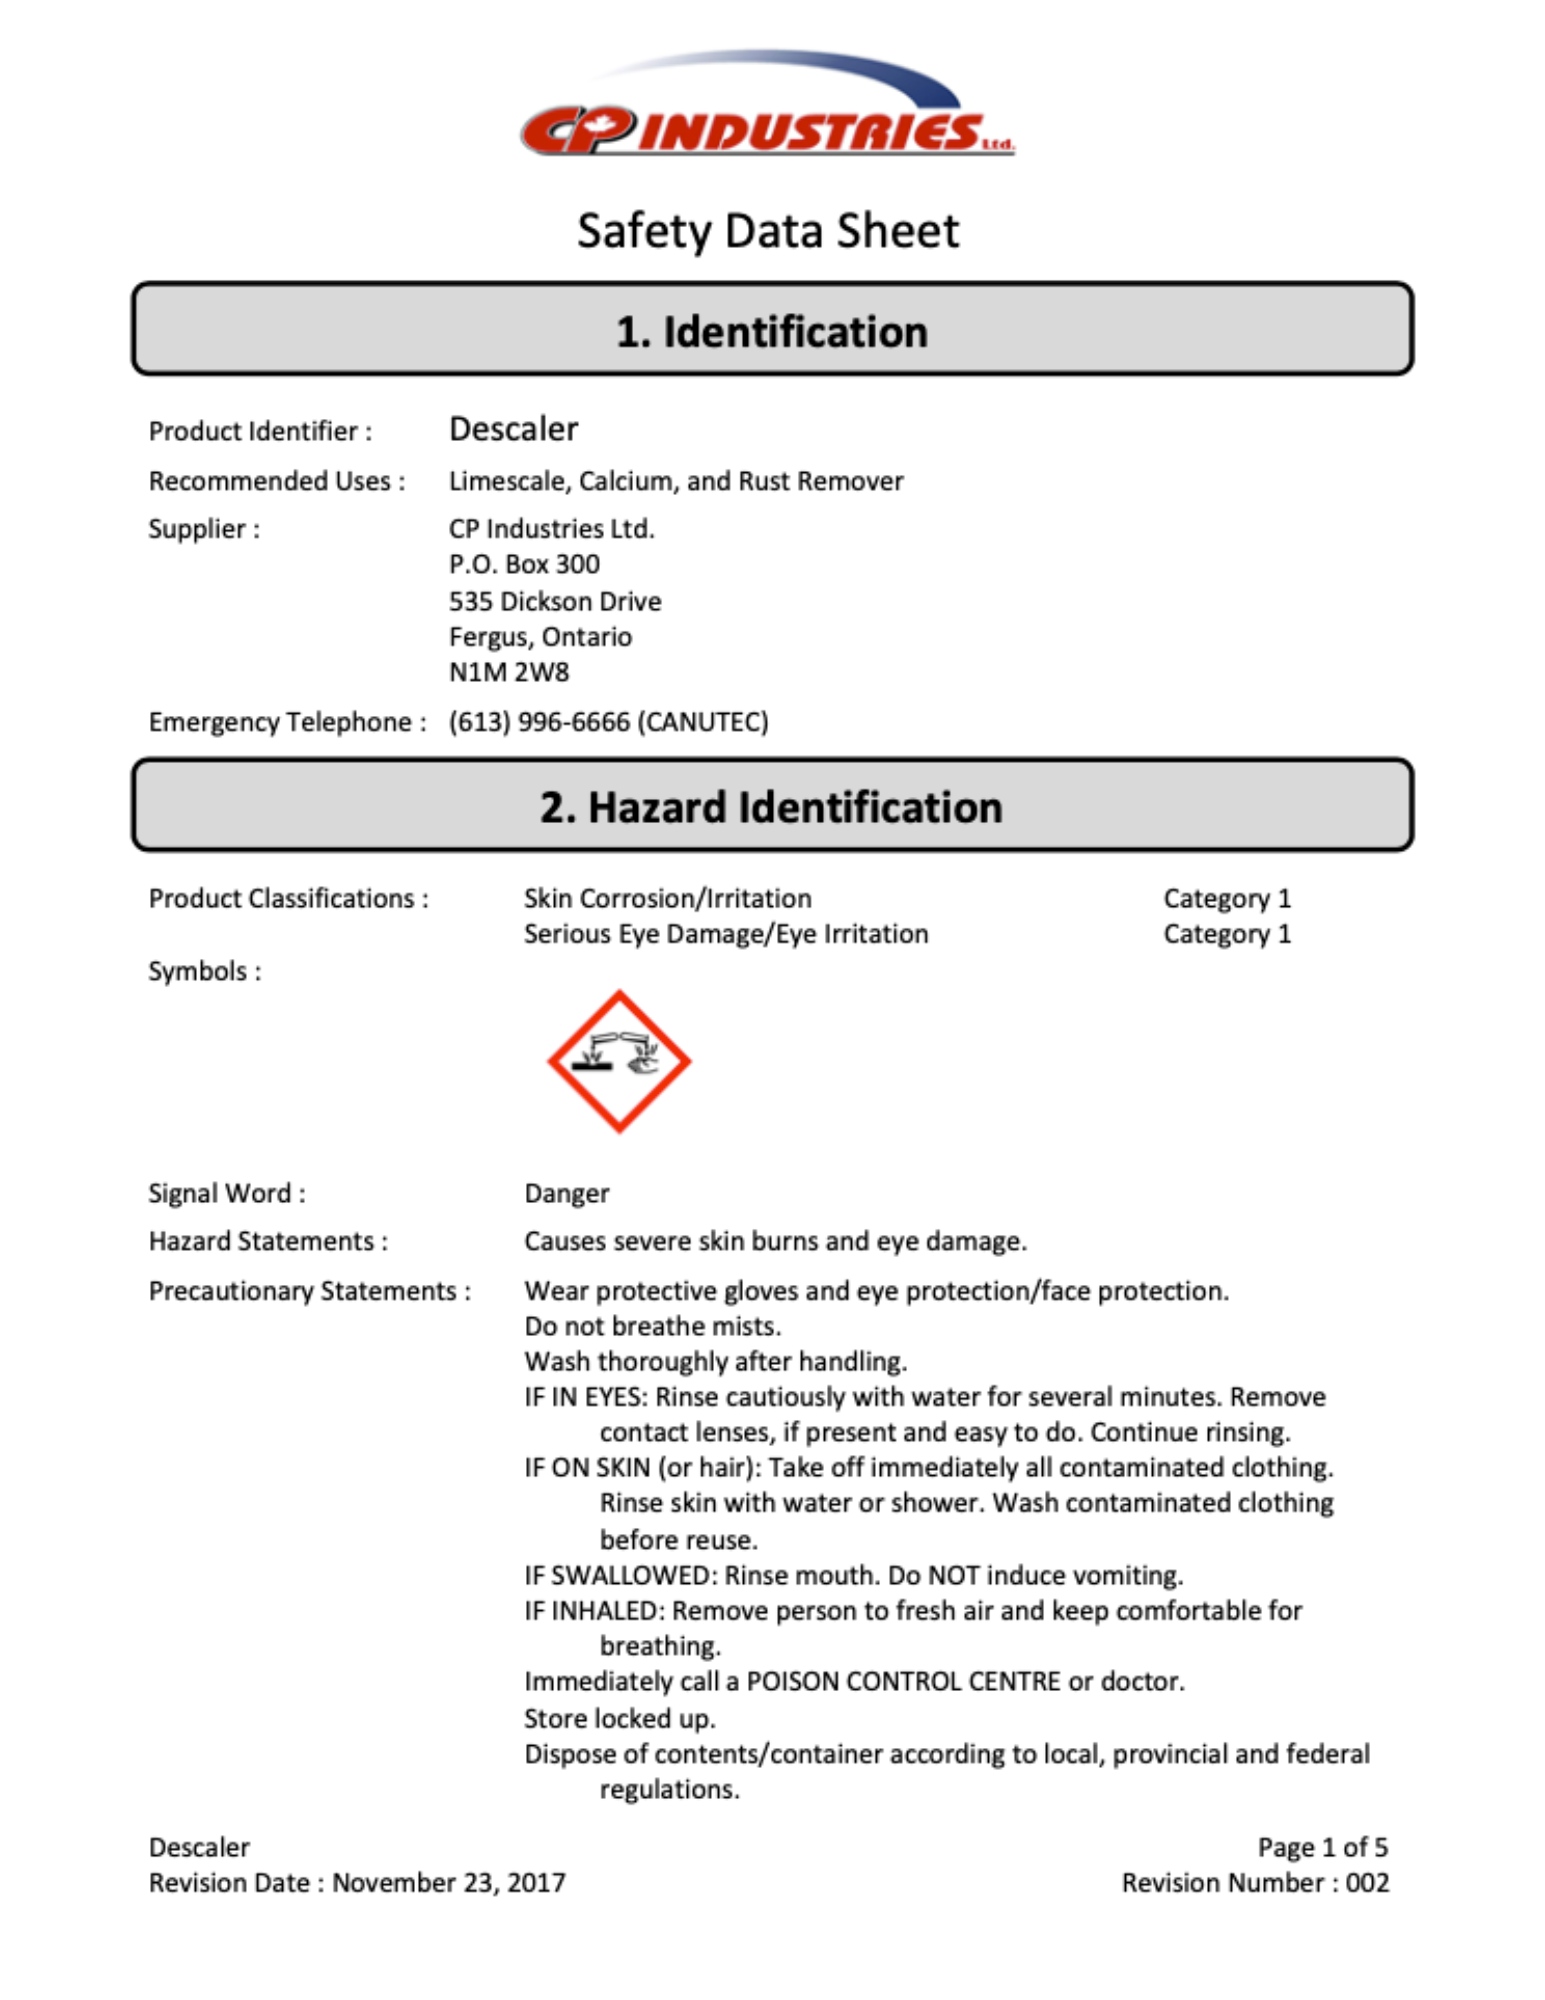 CP Industries safety data sheet for Descaler.